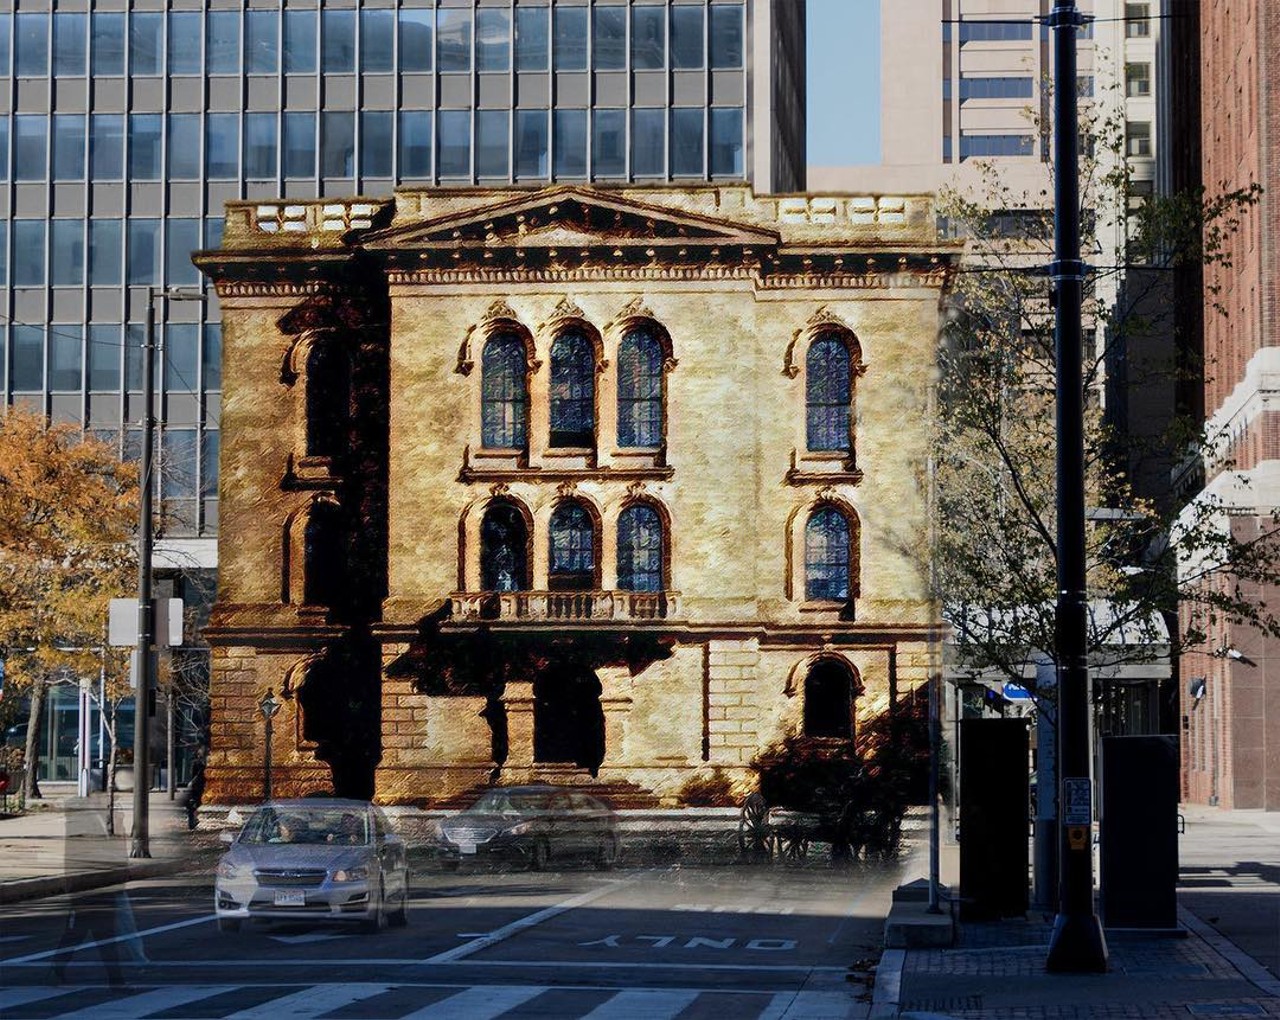 Cleveland, 1876/2016 - Third Cuyahoga County Courthouse (torn down in 1935) in the northwest corner of Public Square.